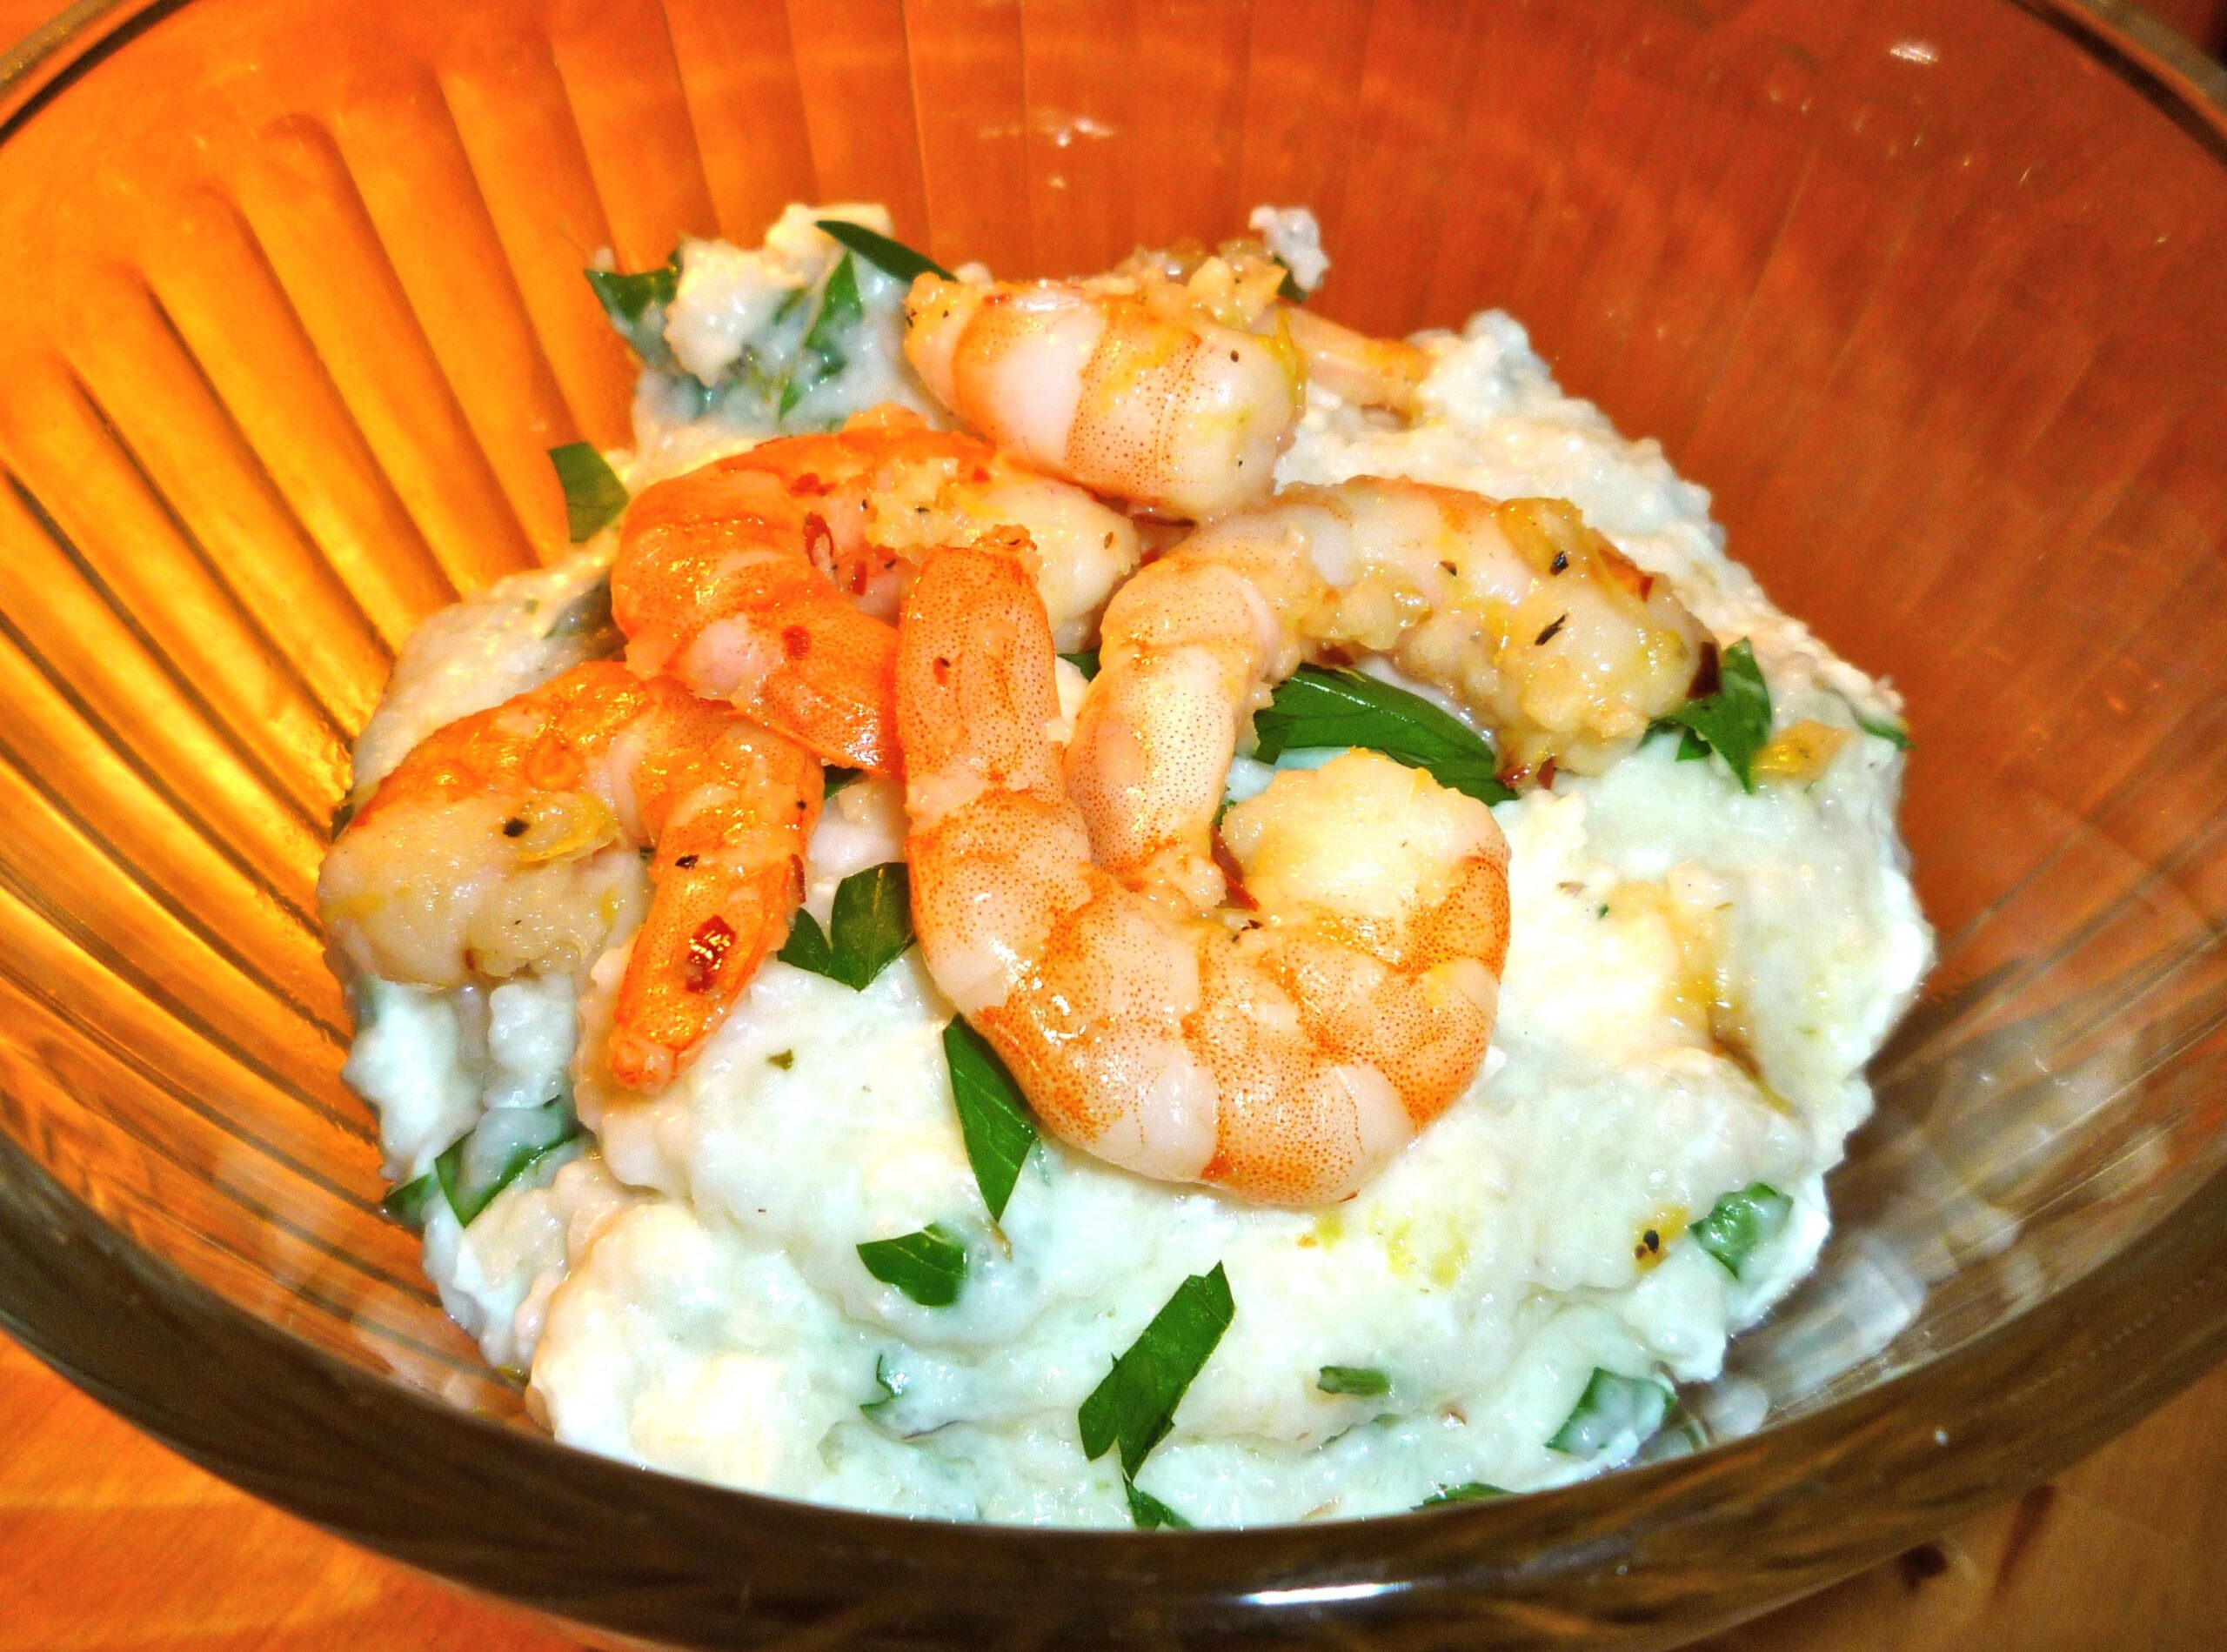  Creamy and savory shrimp and goat cheese grits.